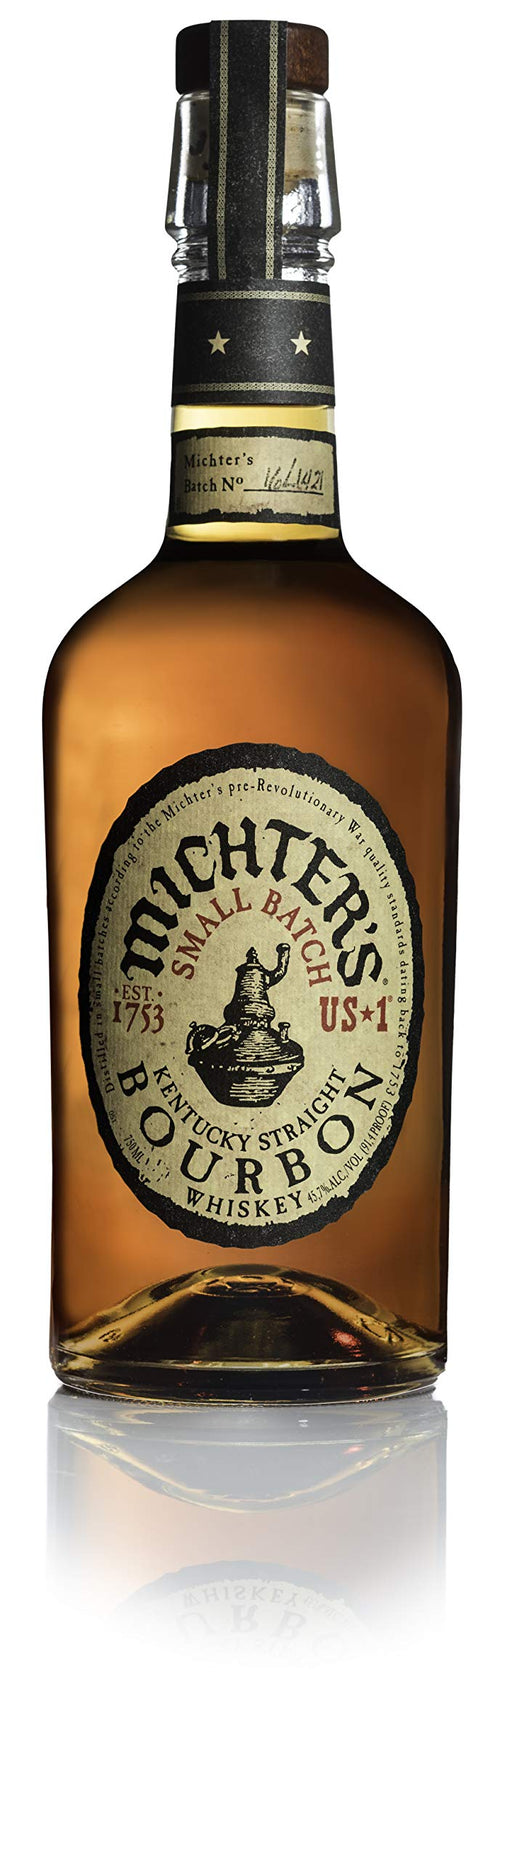 Michters US1 Small Batch Bourbon Whisky, 700 ml  Visit the Michters Store